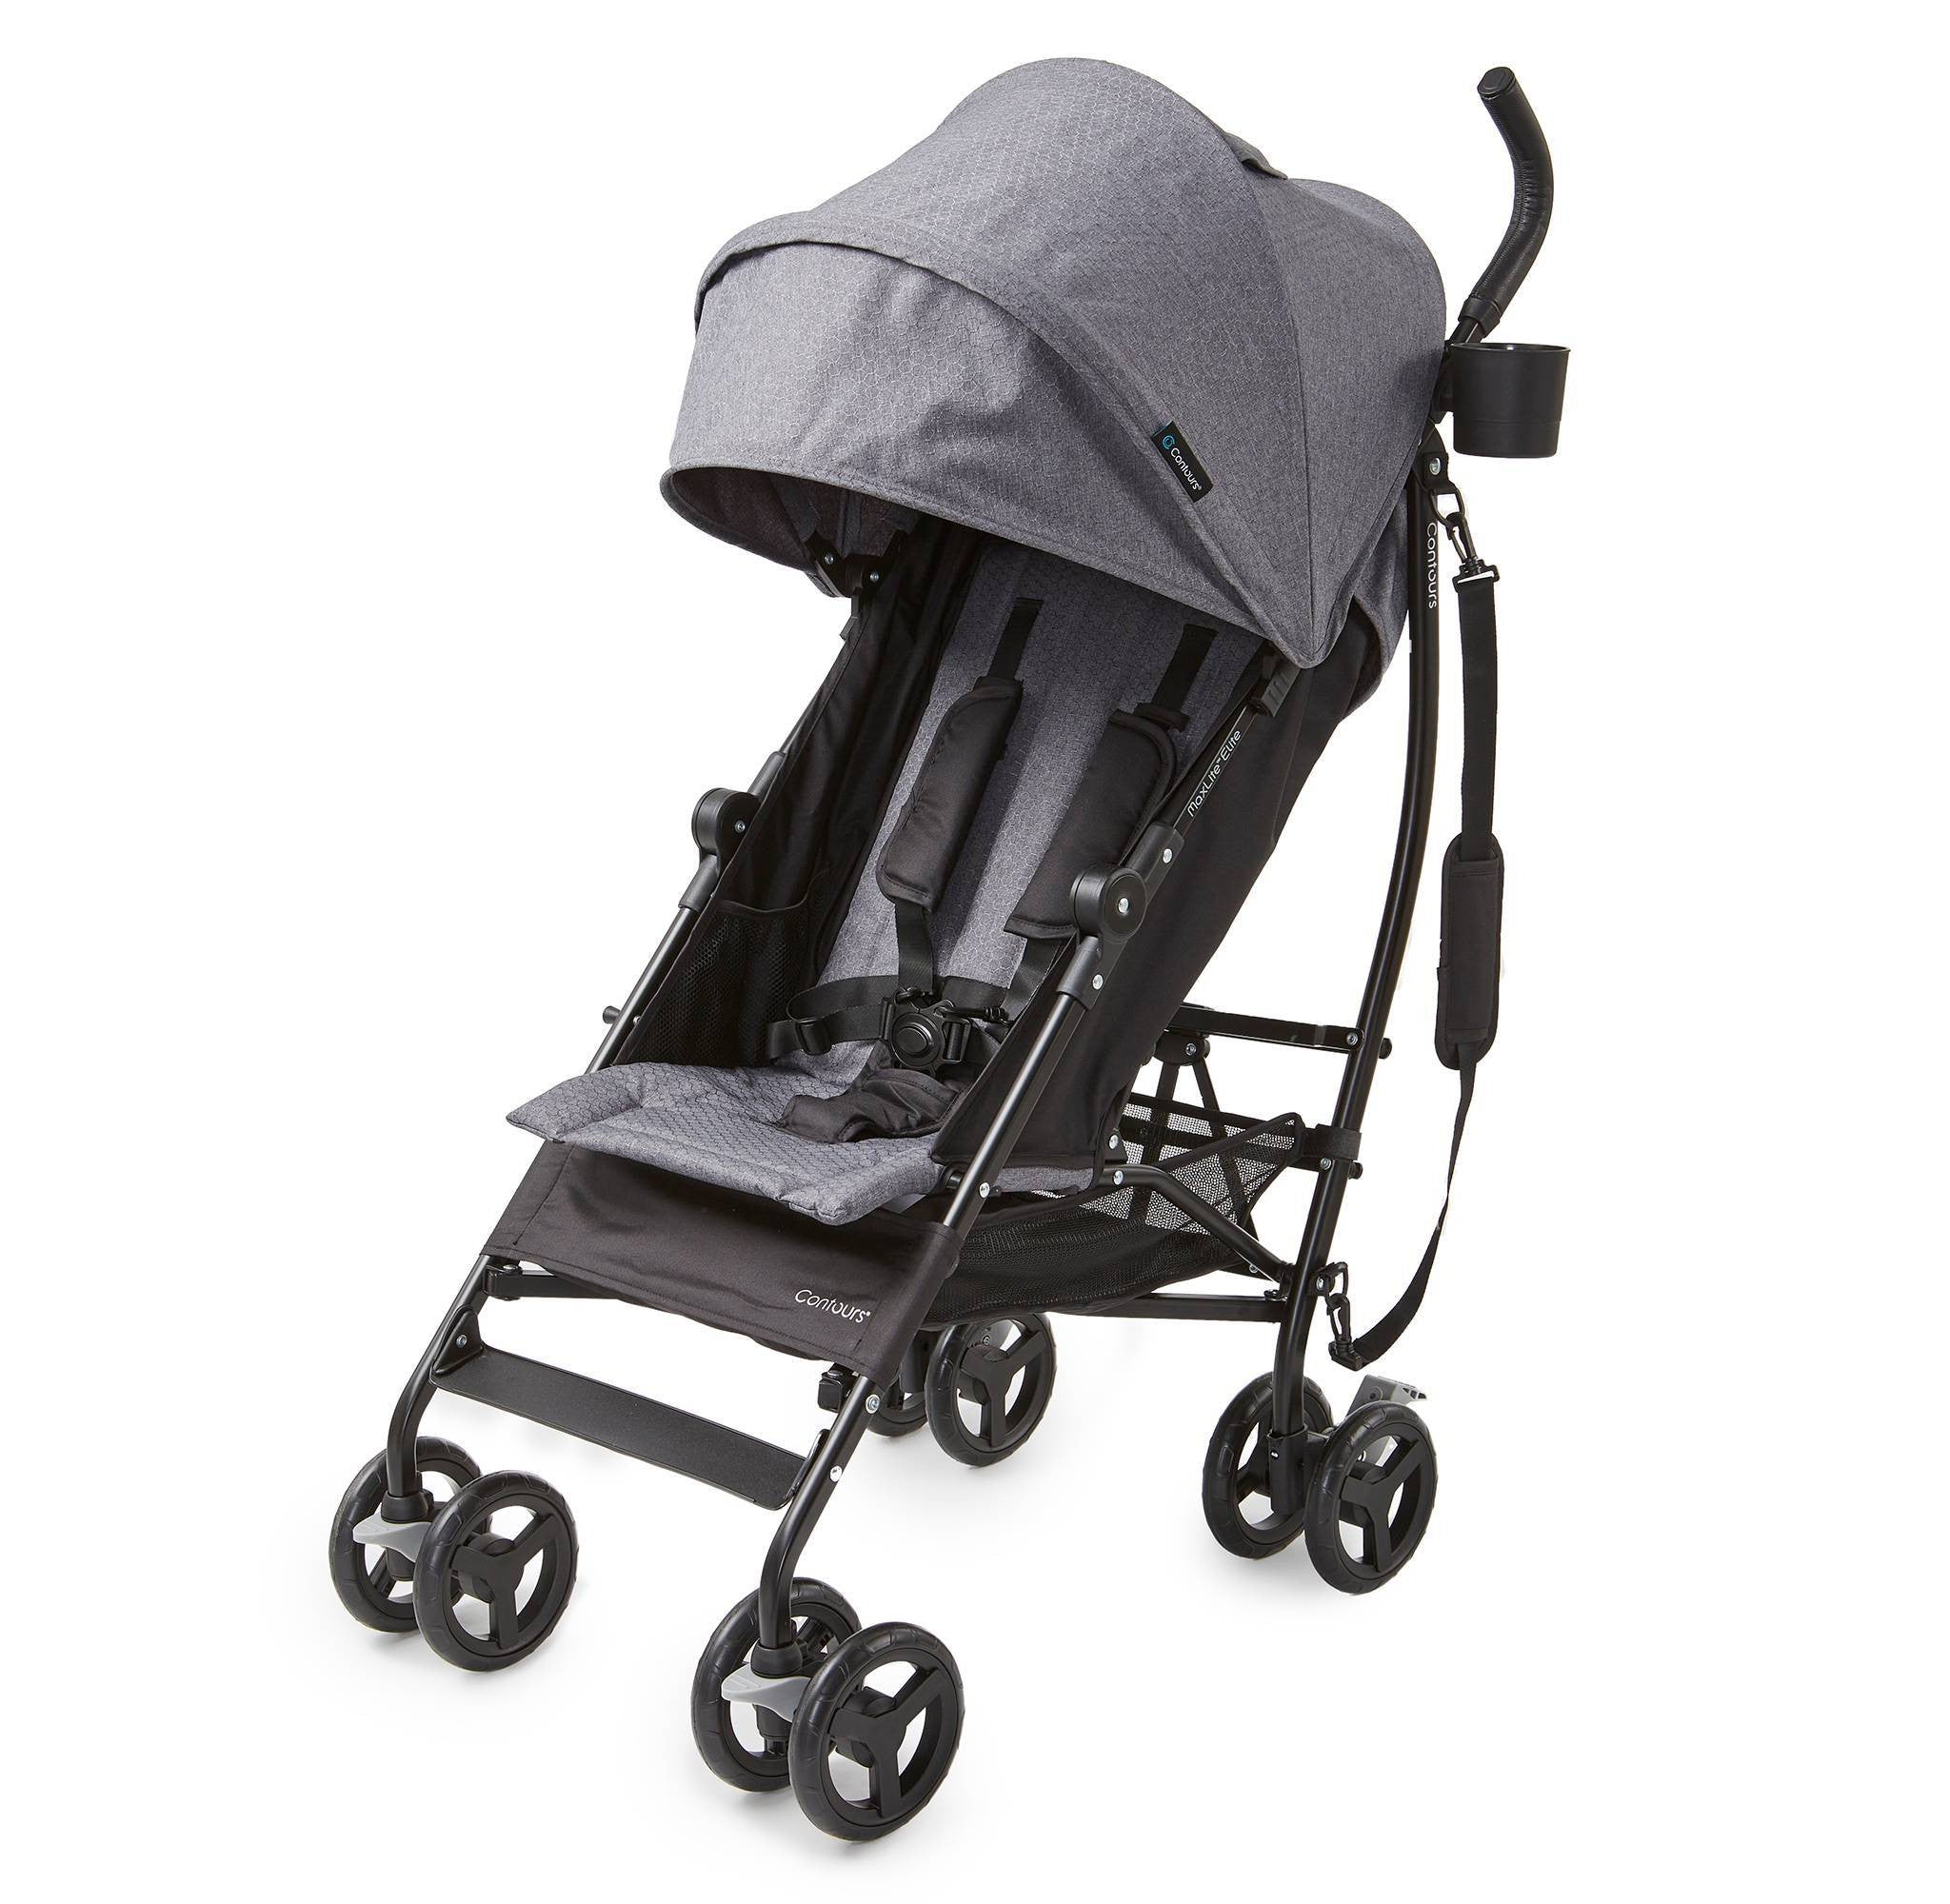 Strollers on Sale (Up to 80% Off) | Rebelstork – Page 7 